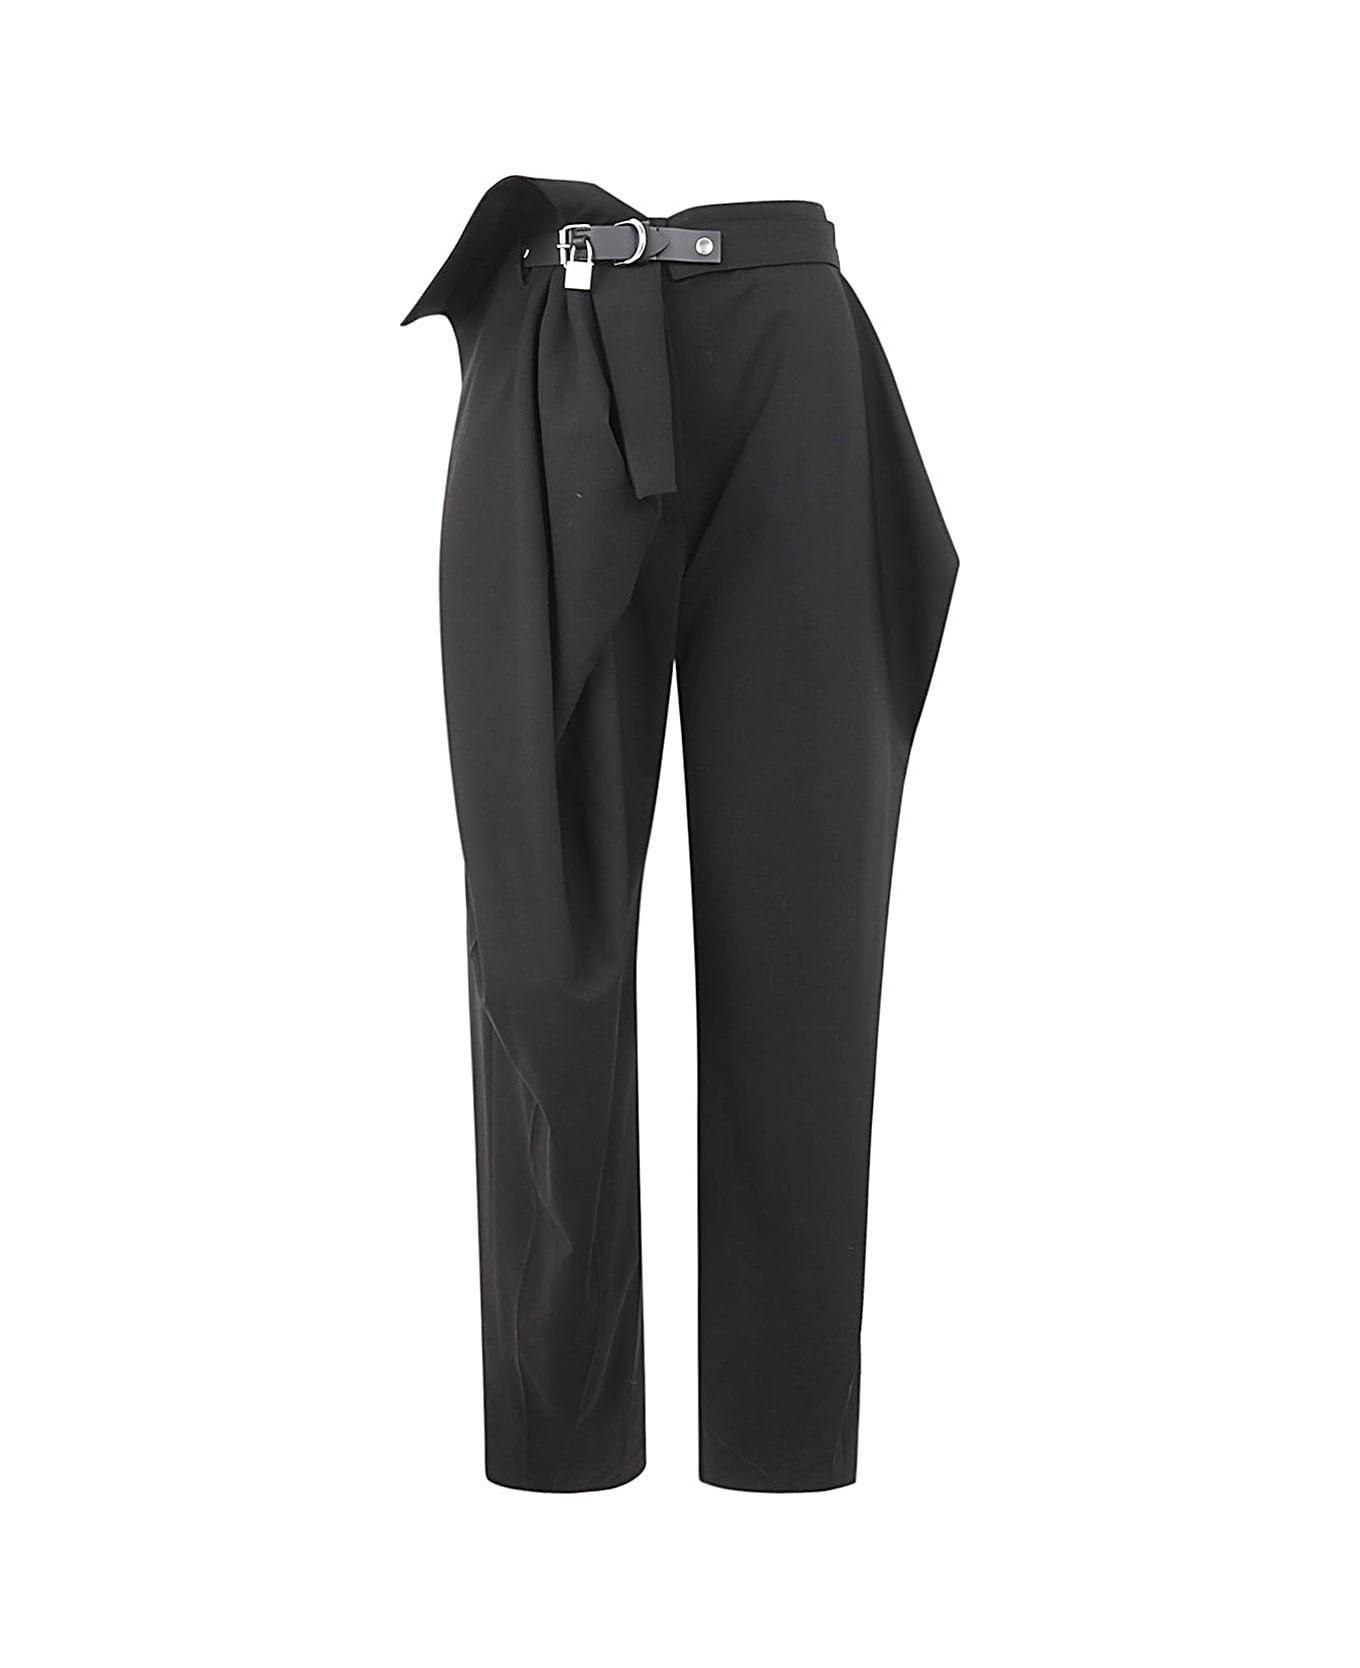 J.W. Anderson Padlock Strap Fold Over Trousers - Black